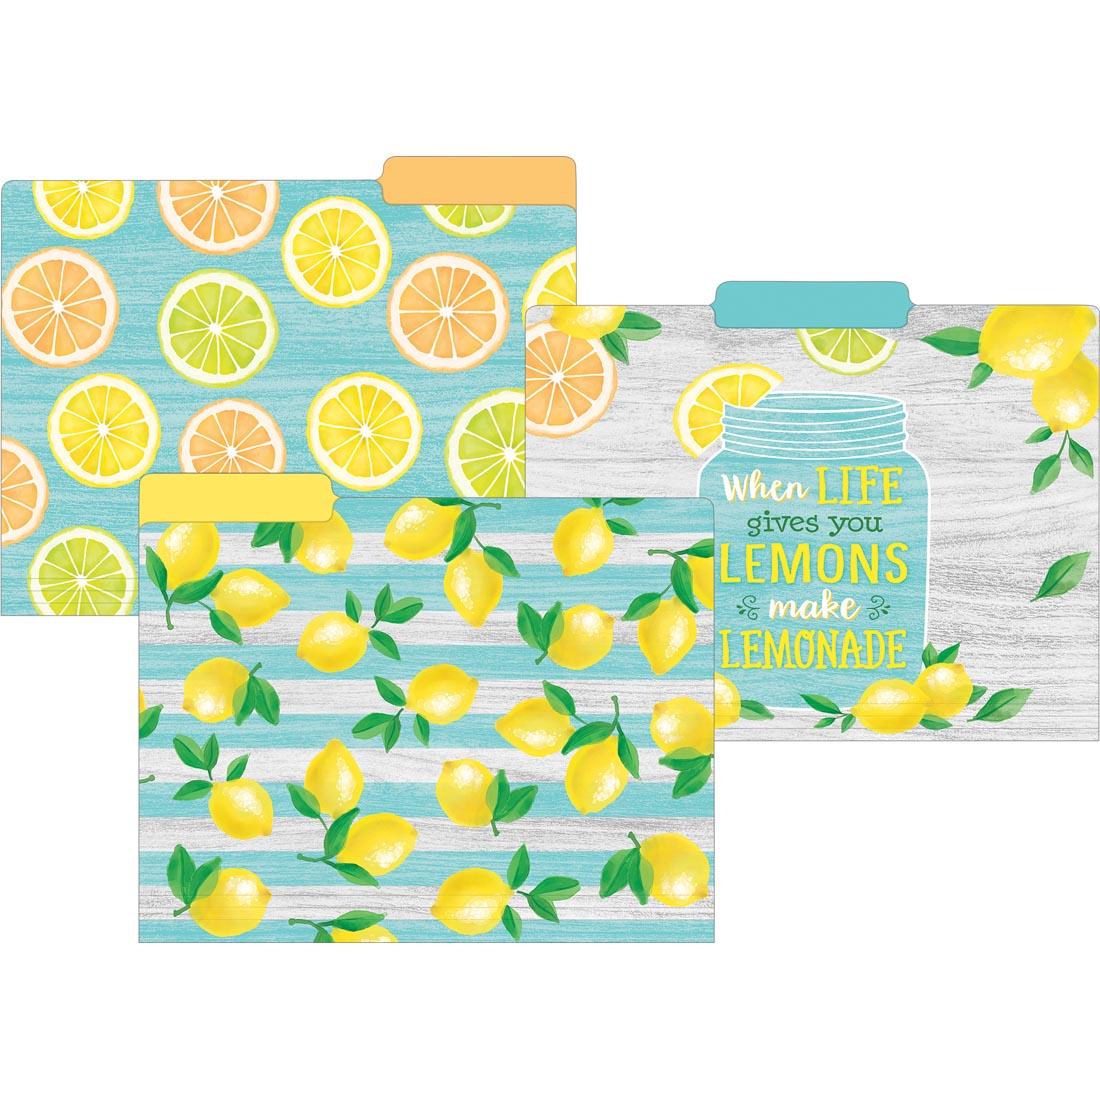 File Folders from the Lemon Zest collection by Teacher Created Resources